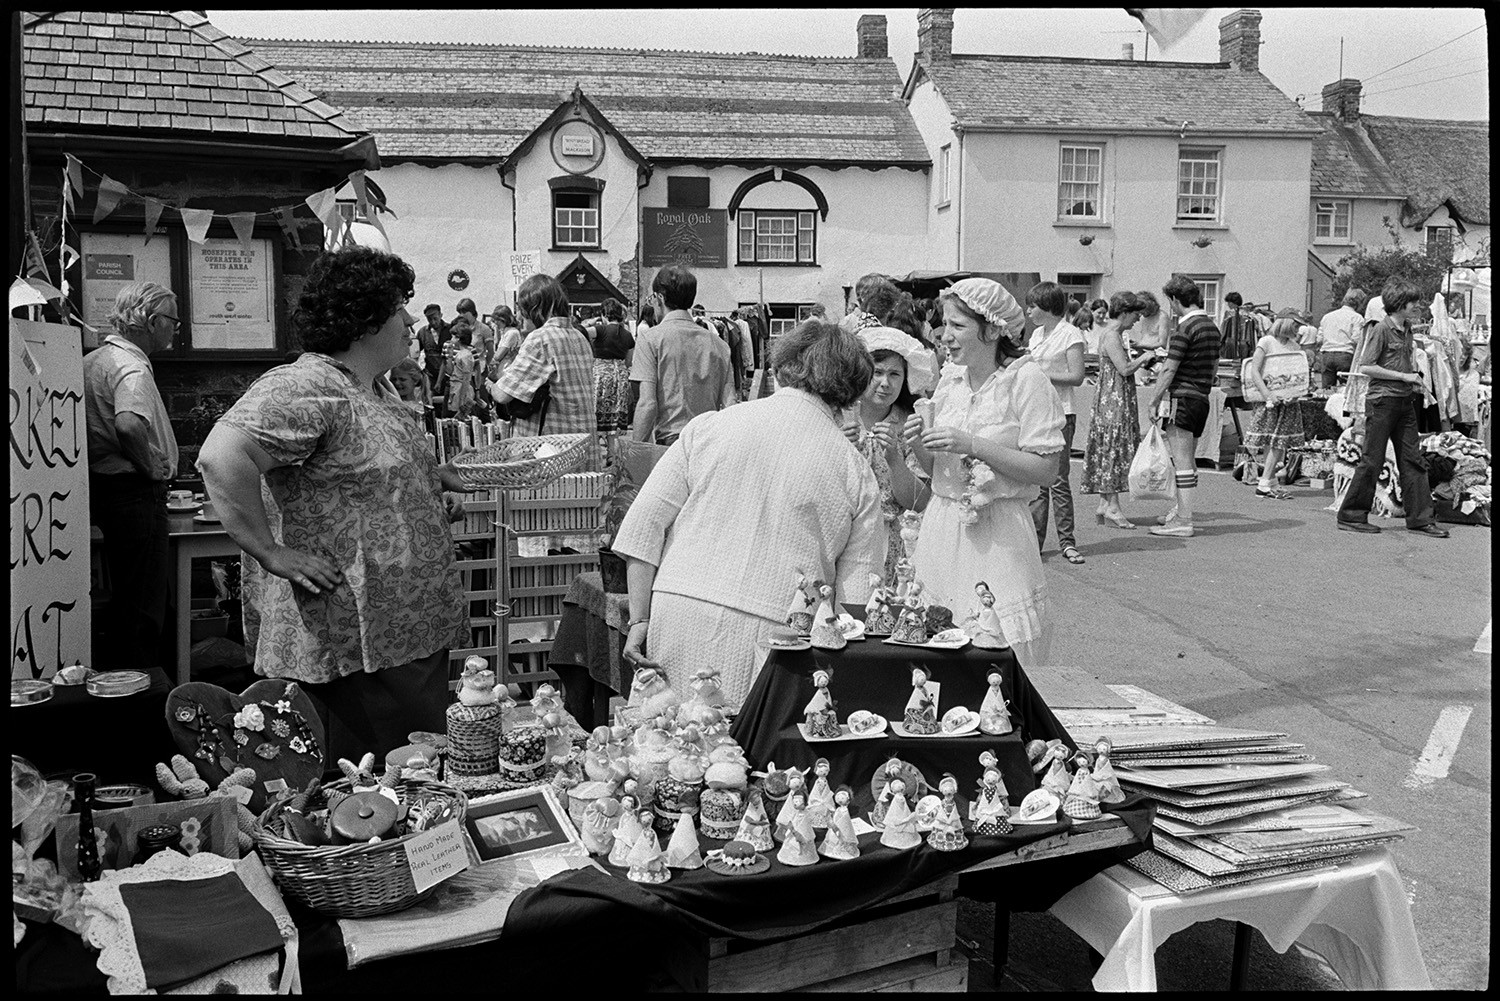 Open air market, village square part of festival, stalls, flags, crafts, books, plants. 
[A woman running a stall selling broaches, knitted items and small figurines at Dolton Festival or open air market outside the Royal oak pub in Dolton. People are looking at other stalls in the background.]